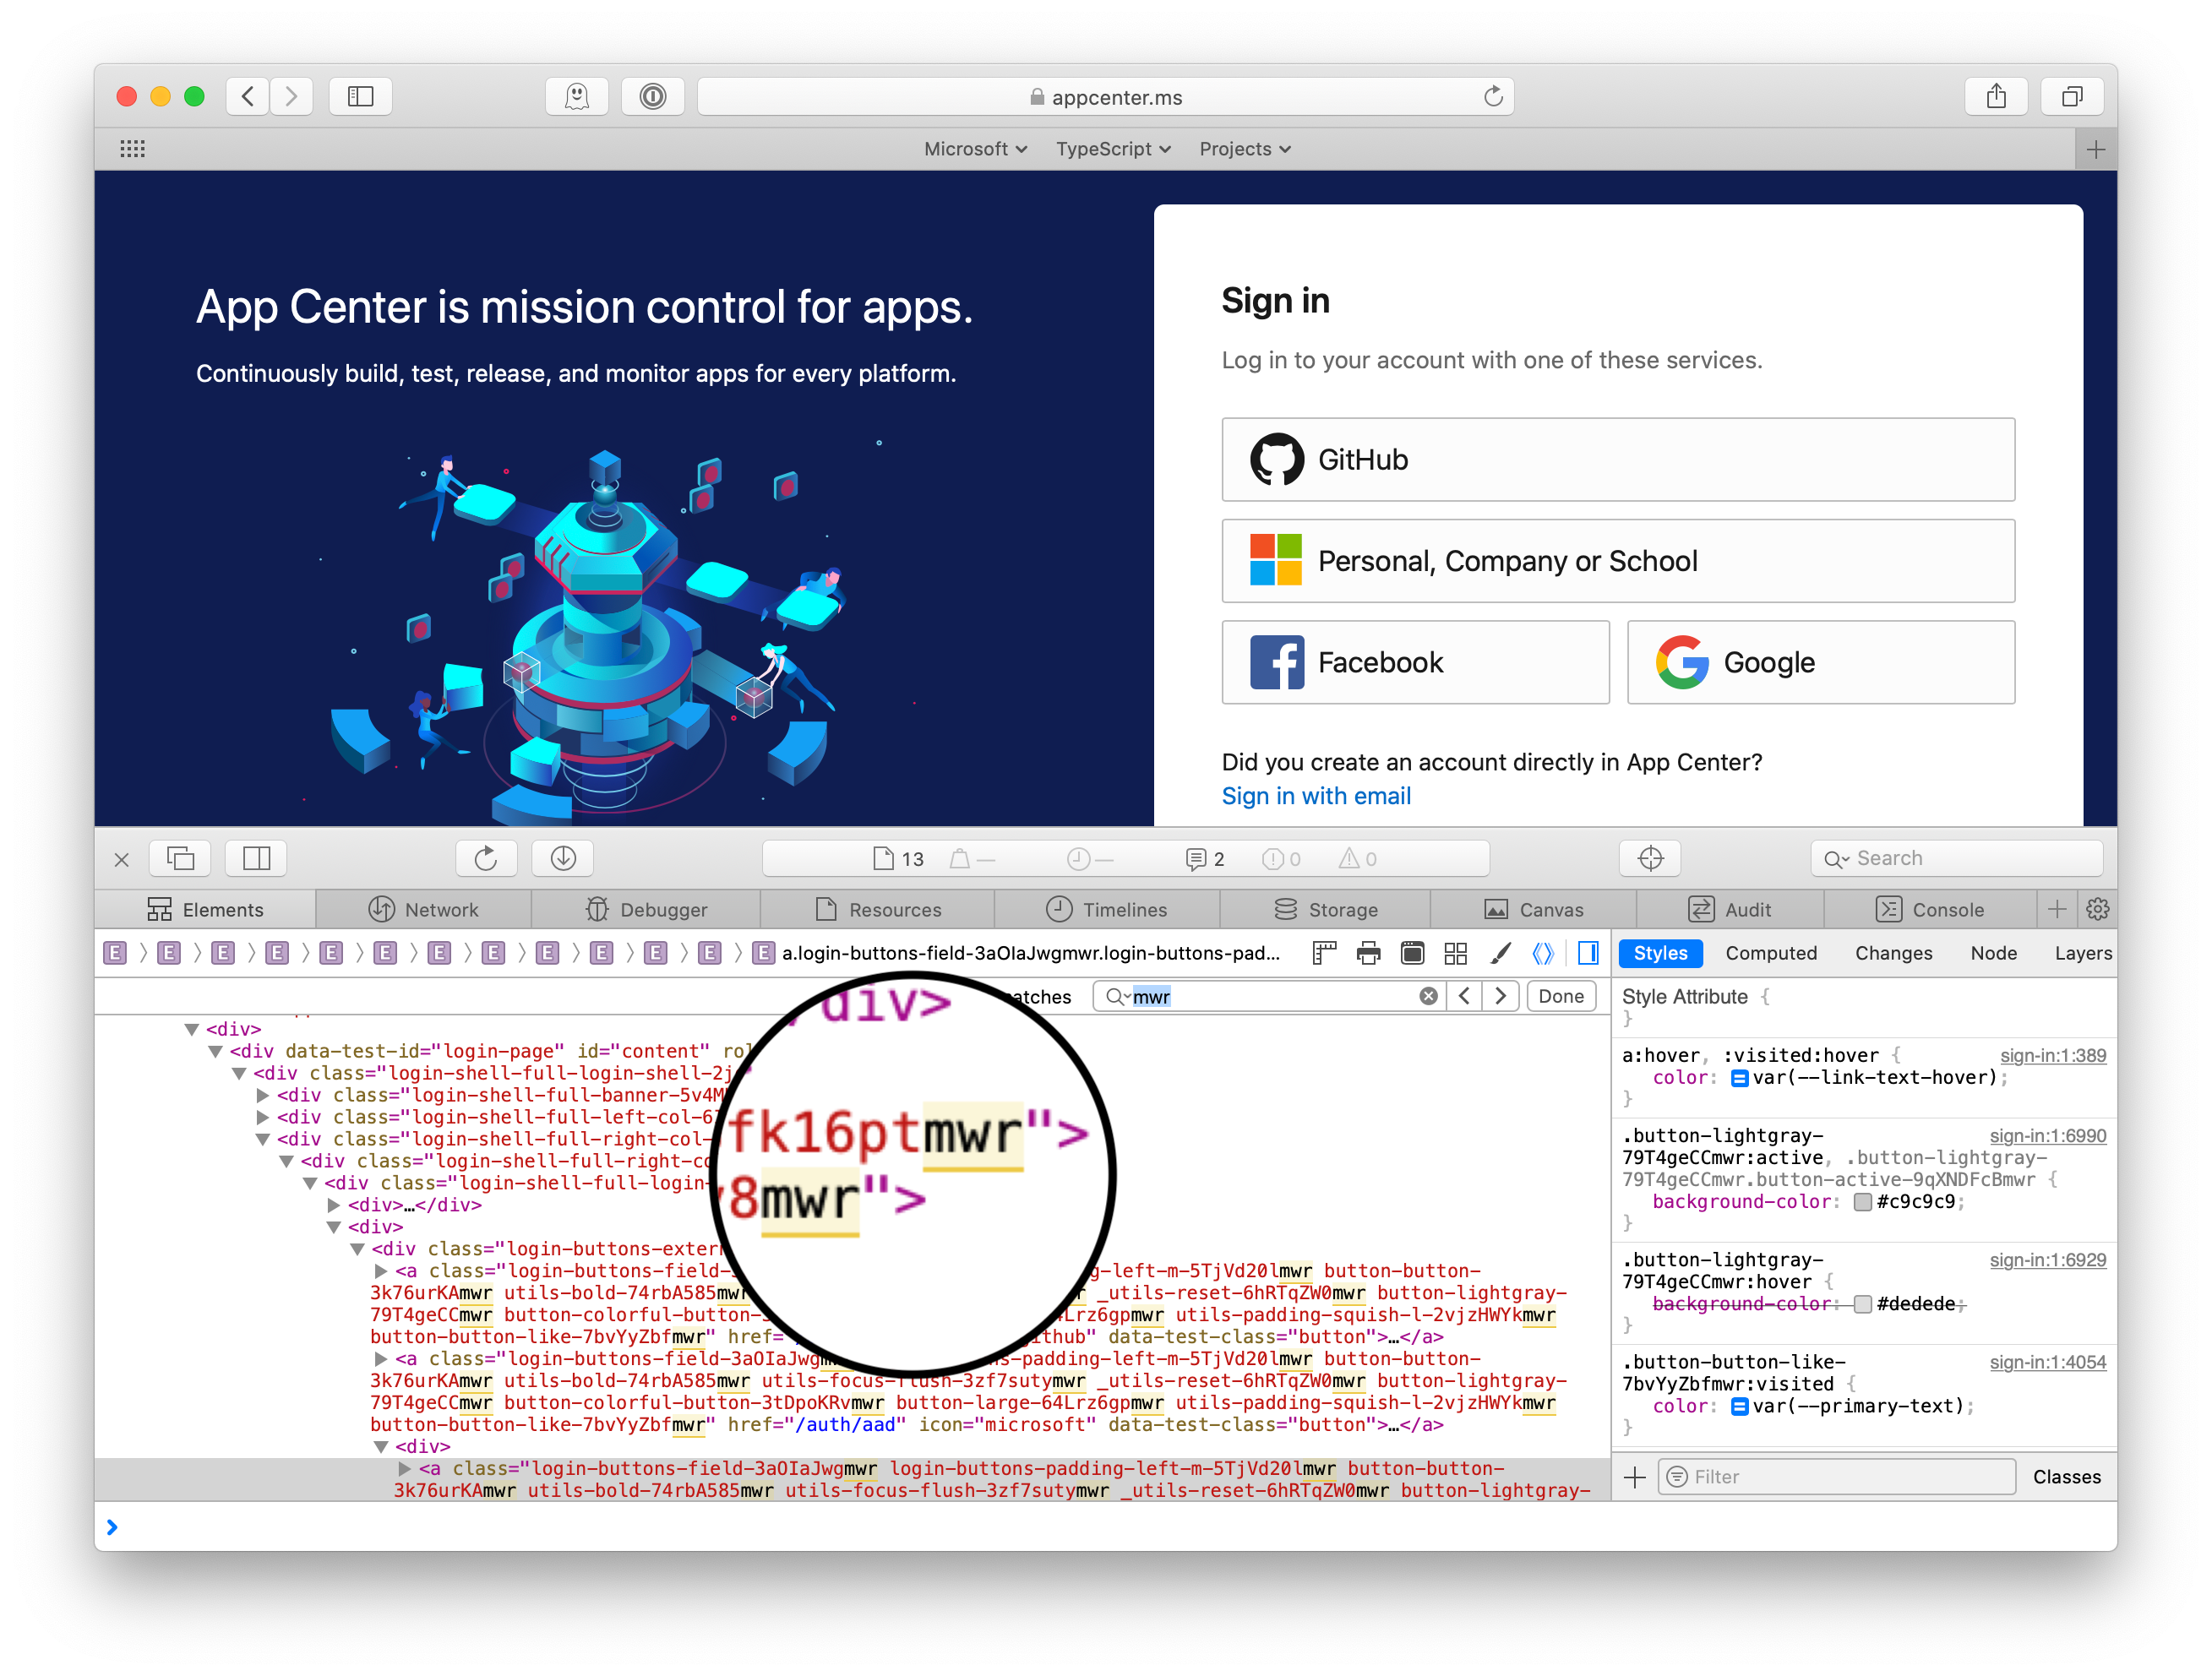 A screenshot of the App Center login page with Safari developer tools open, showing many search results in the elements panel for the string “mwr.”